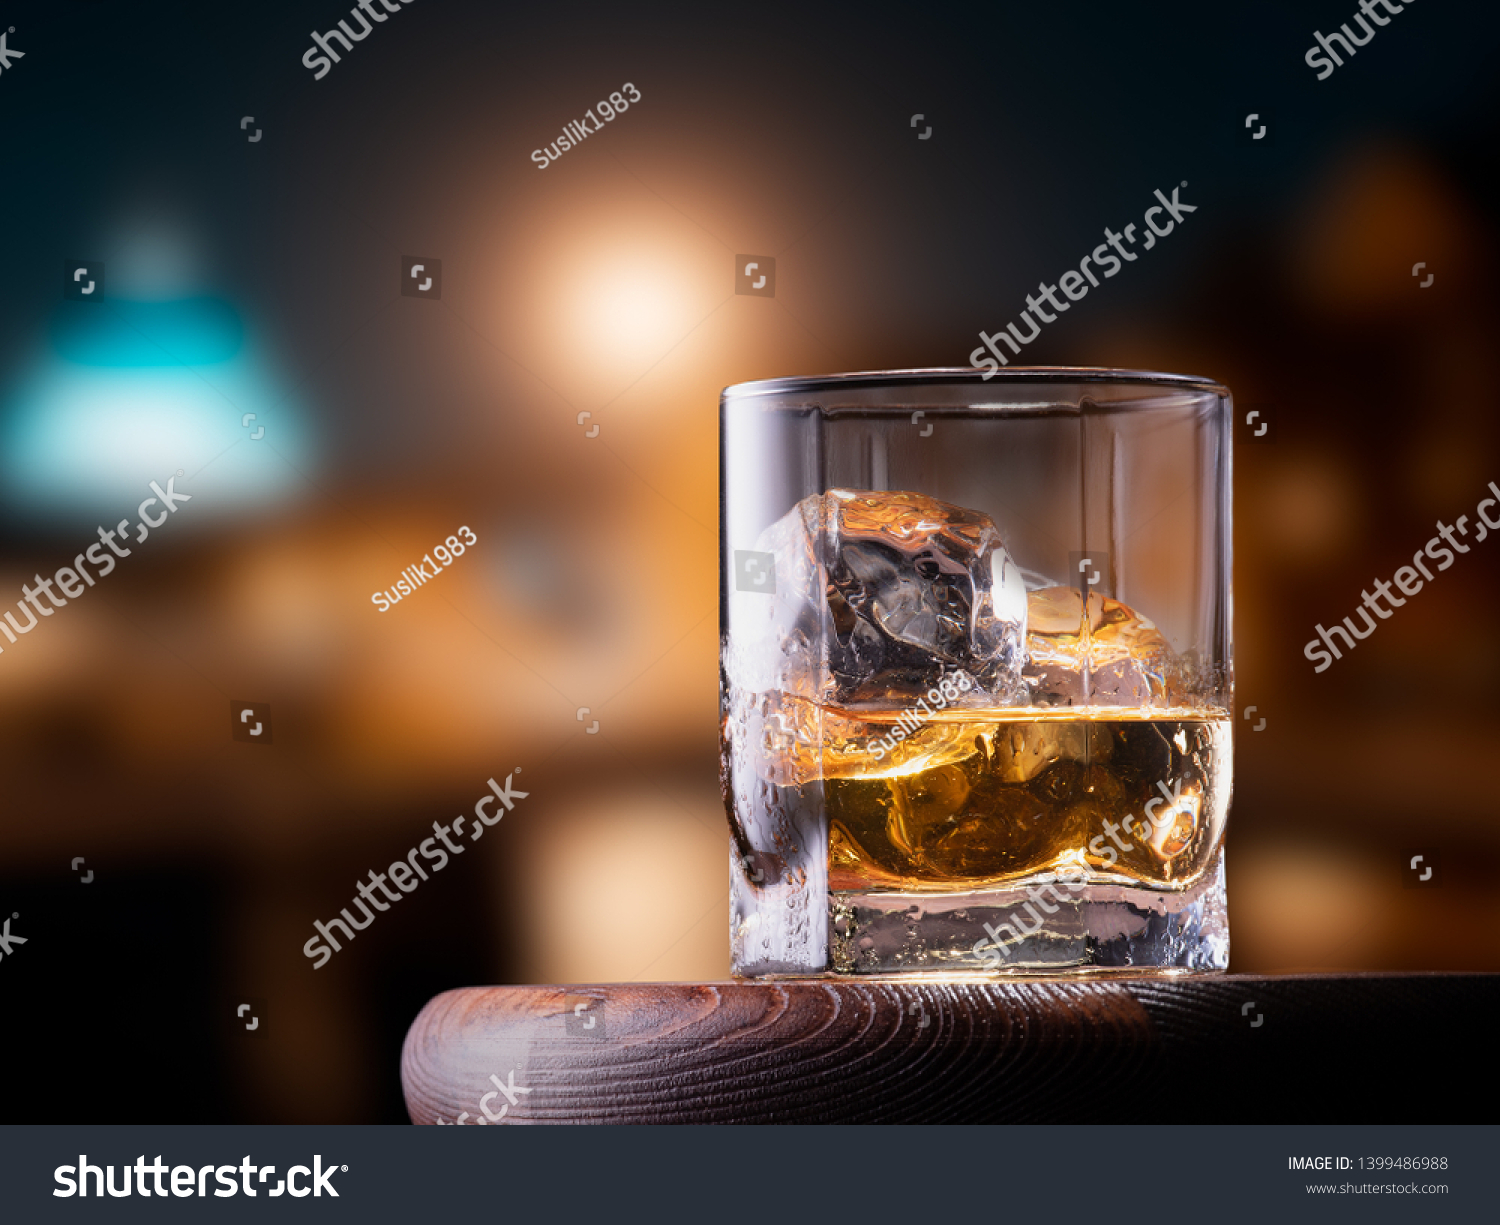 Glass of whiskey with ice cubes on the wooden table with city view background #1399486988